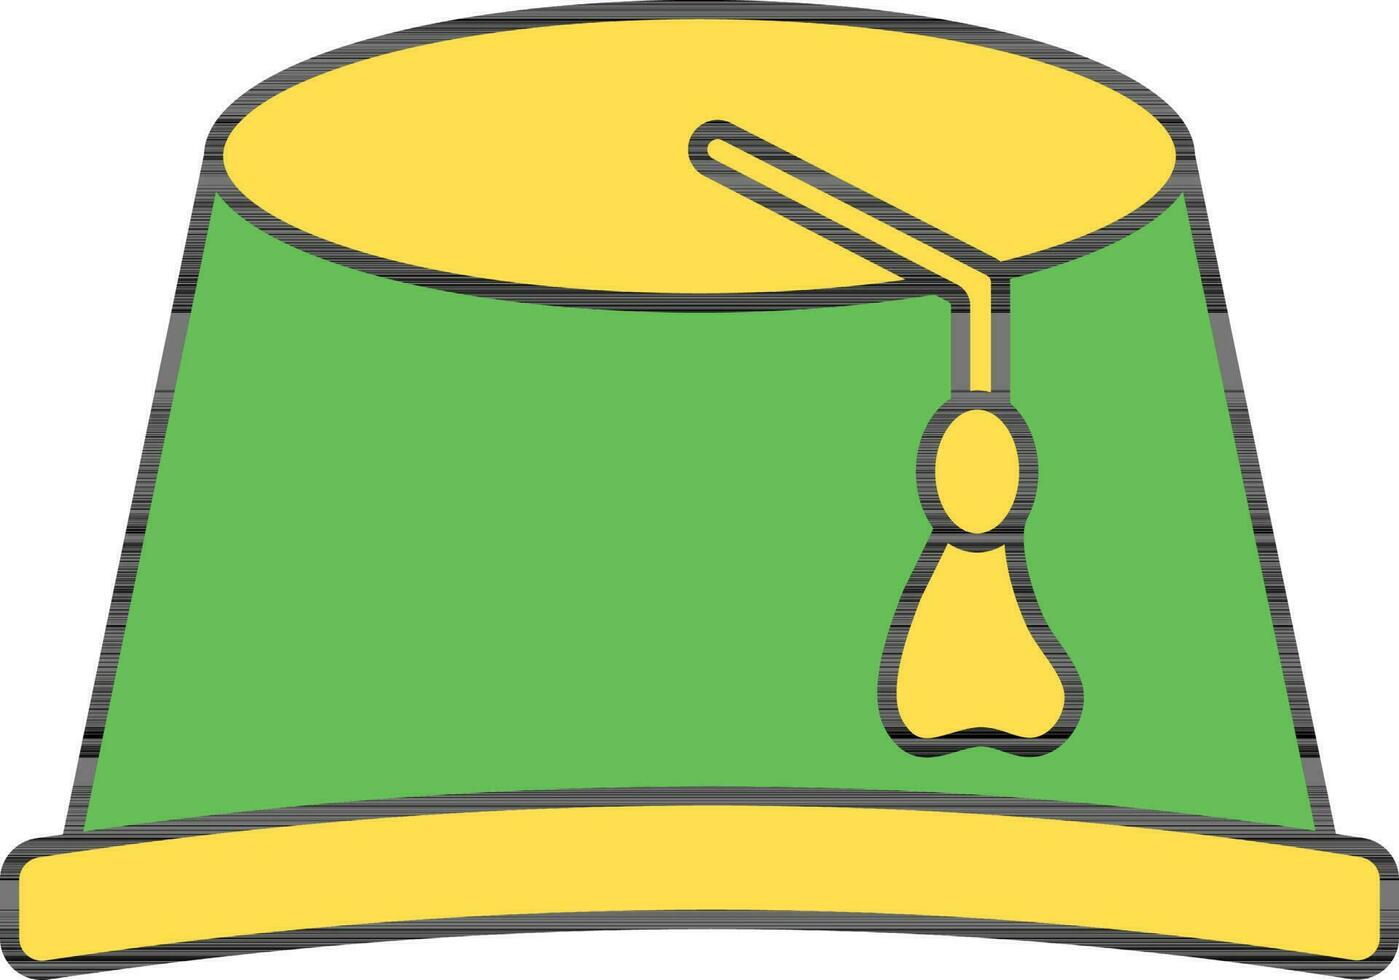 Illustration Of Fez Icon In Green And Yellow Color. vector